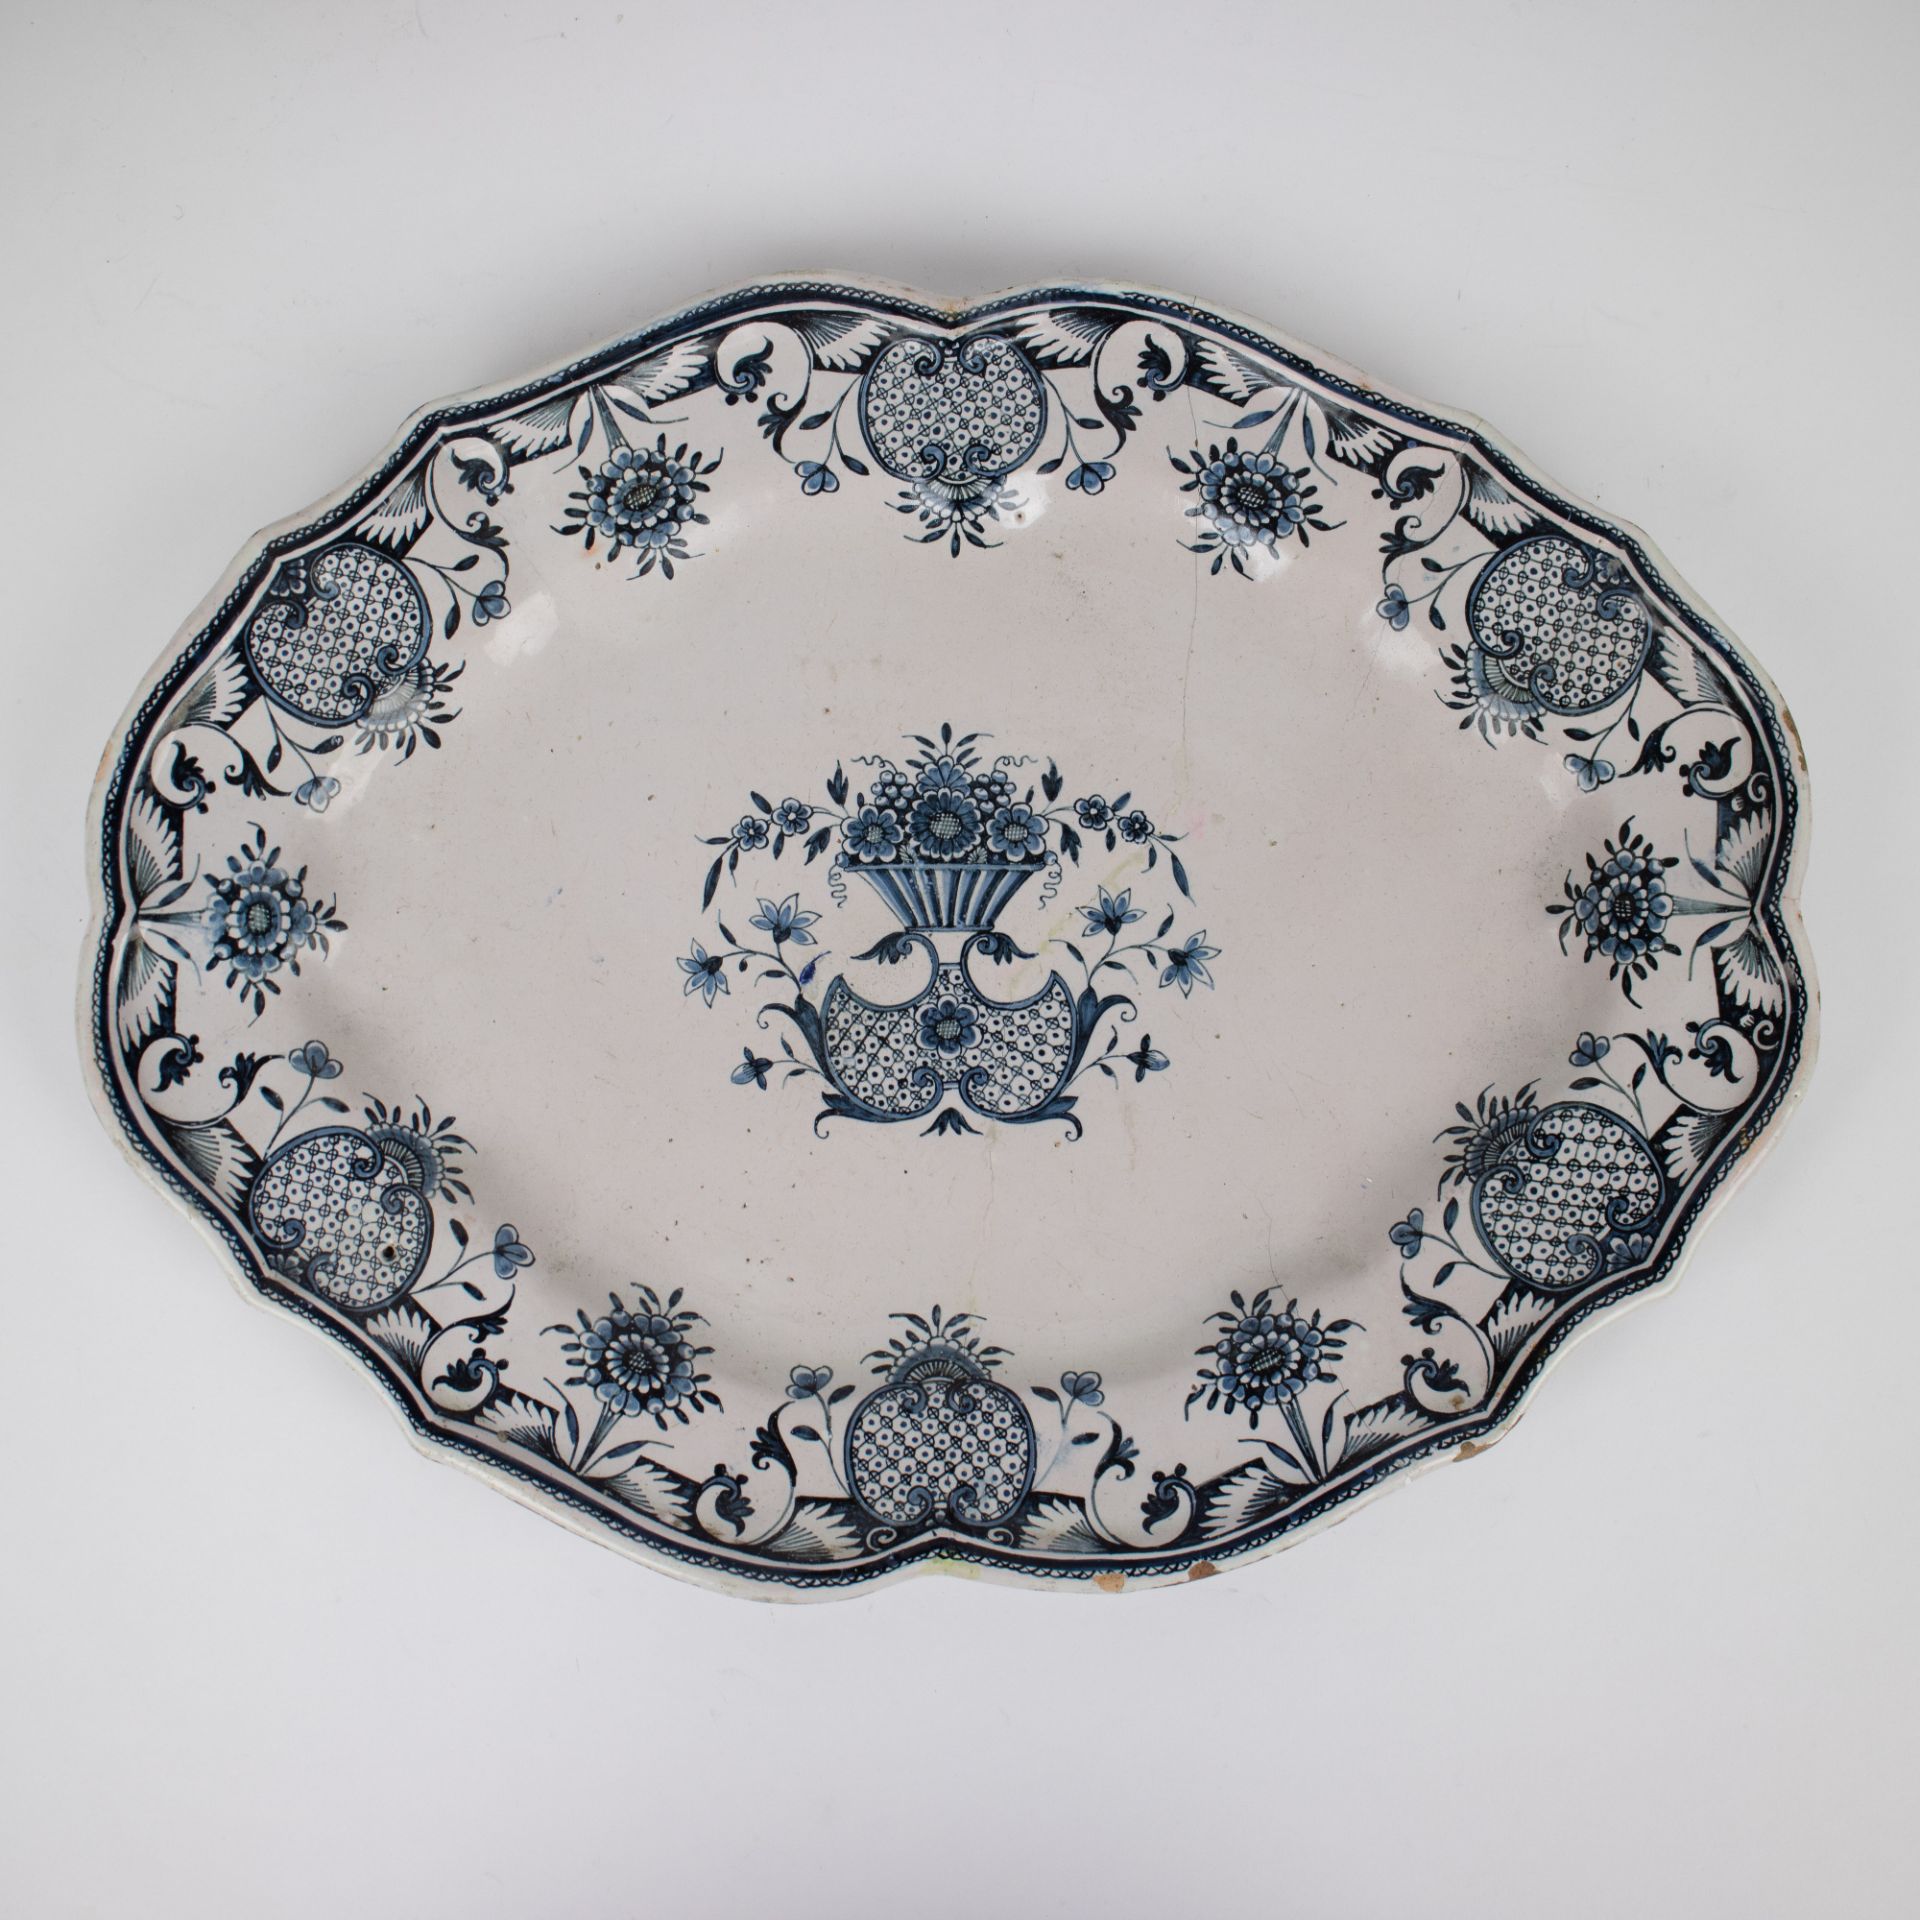 Faience Rouen, revolution plate, jug 18th - 19th century - Image 6 of 12